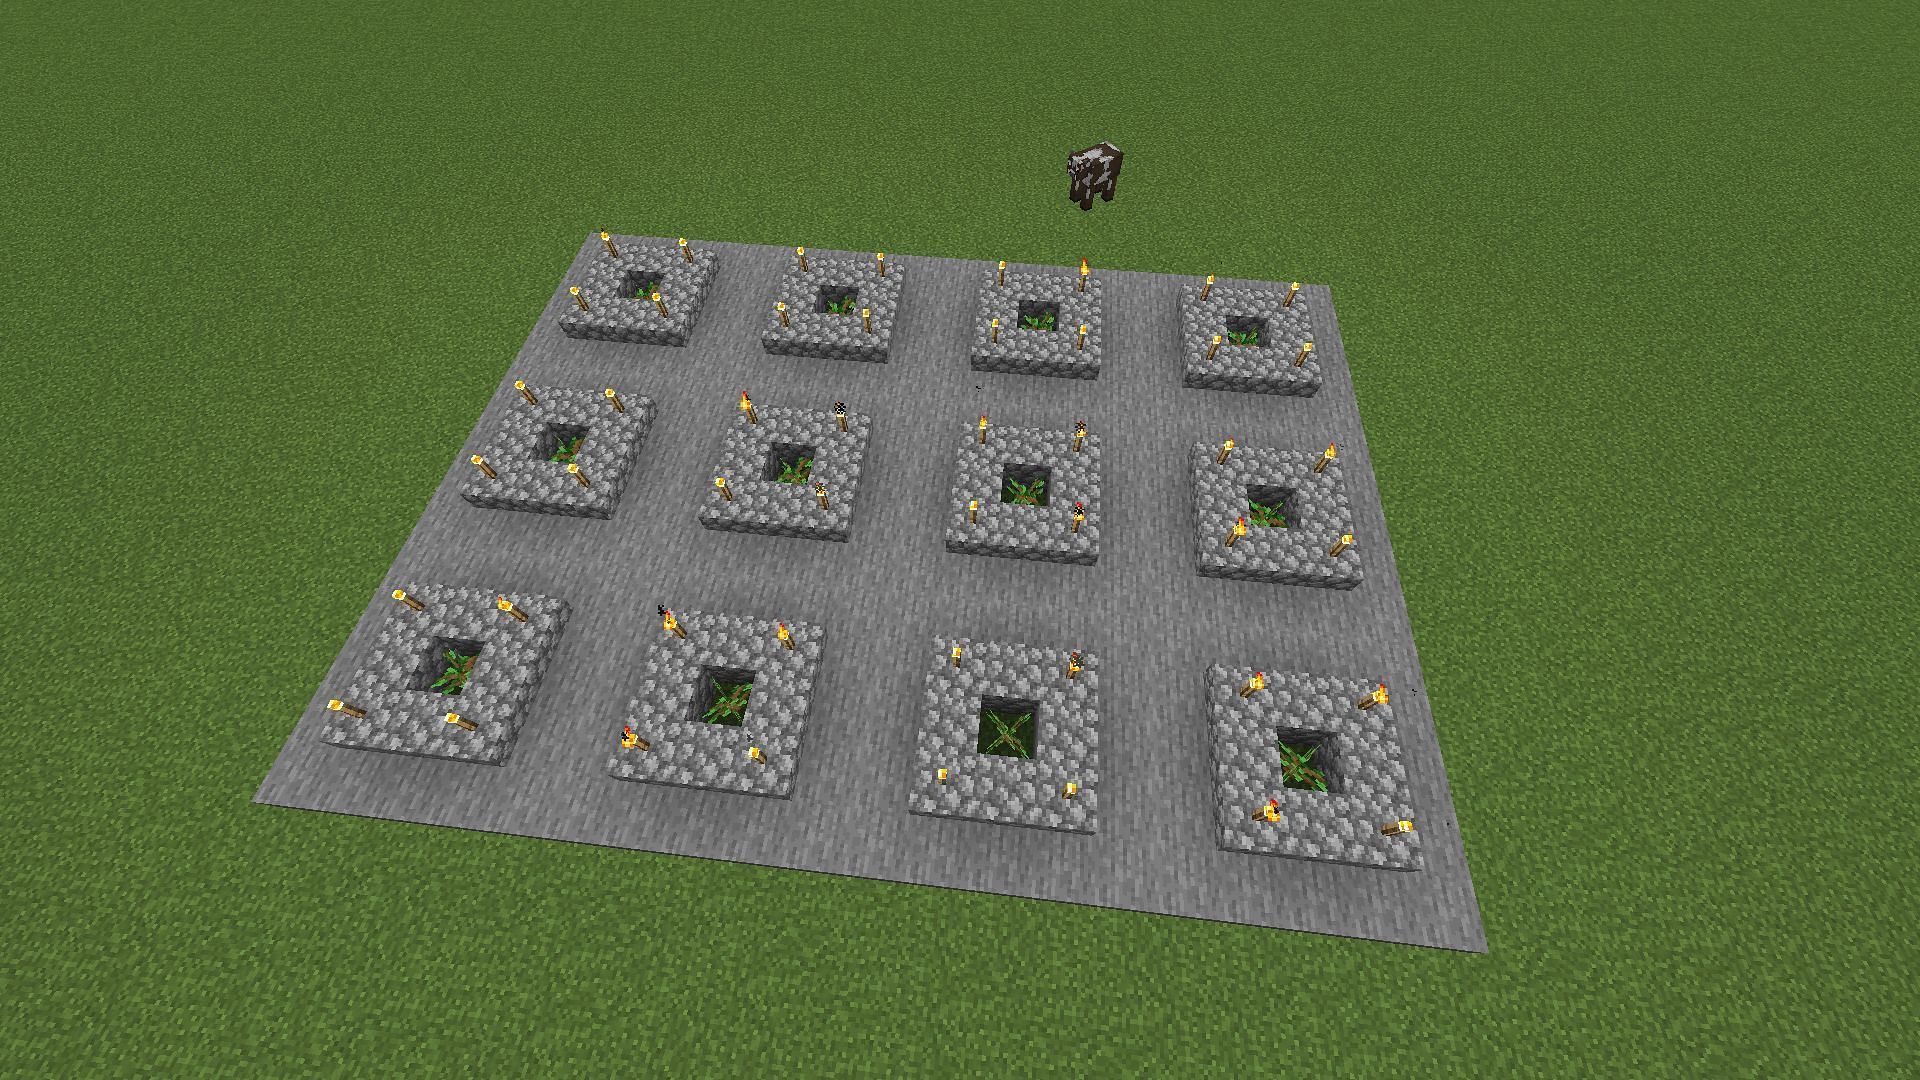 Torches are added to the planter boxes, and saplings are placed for the tree farm (Image via Mojang)